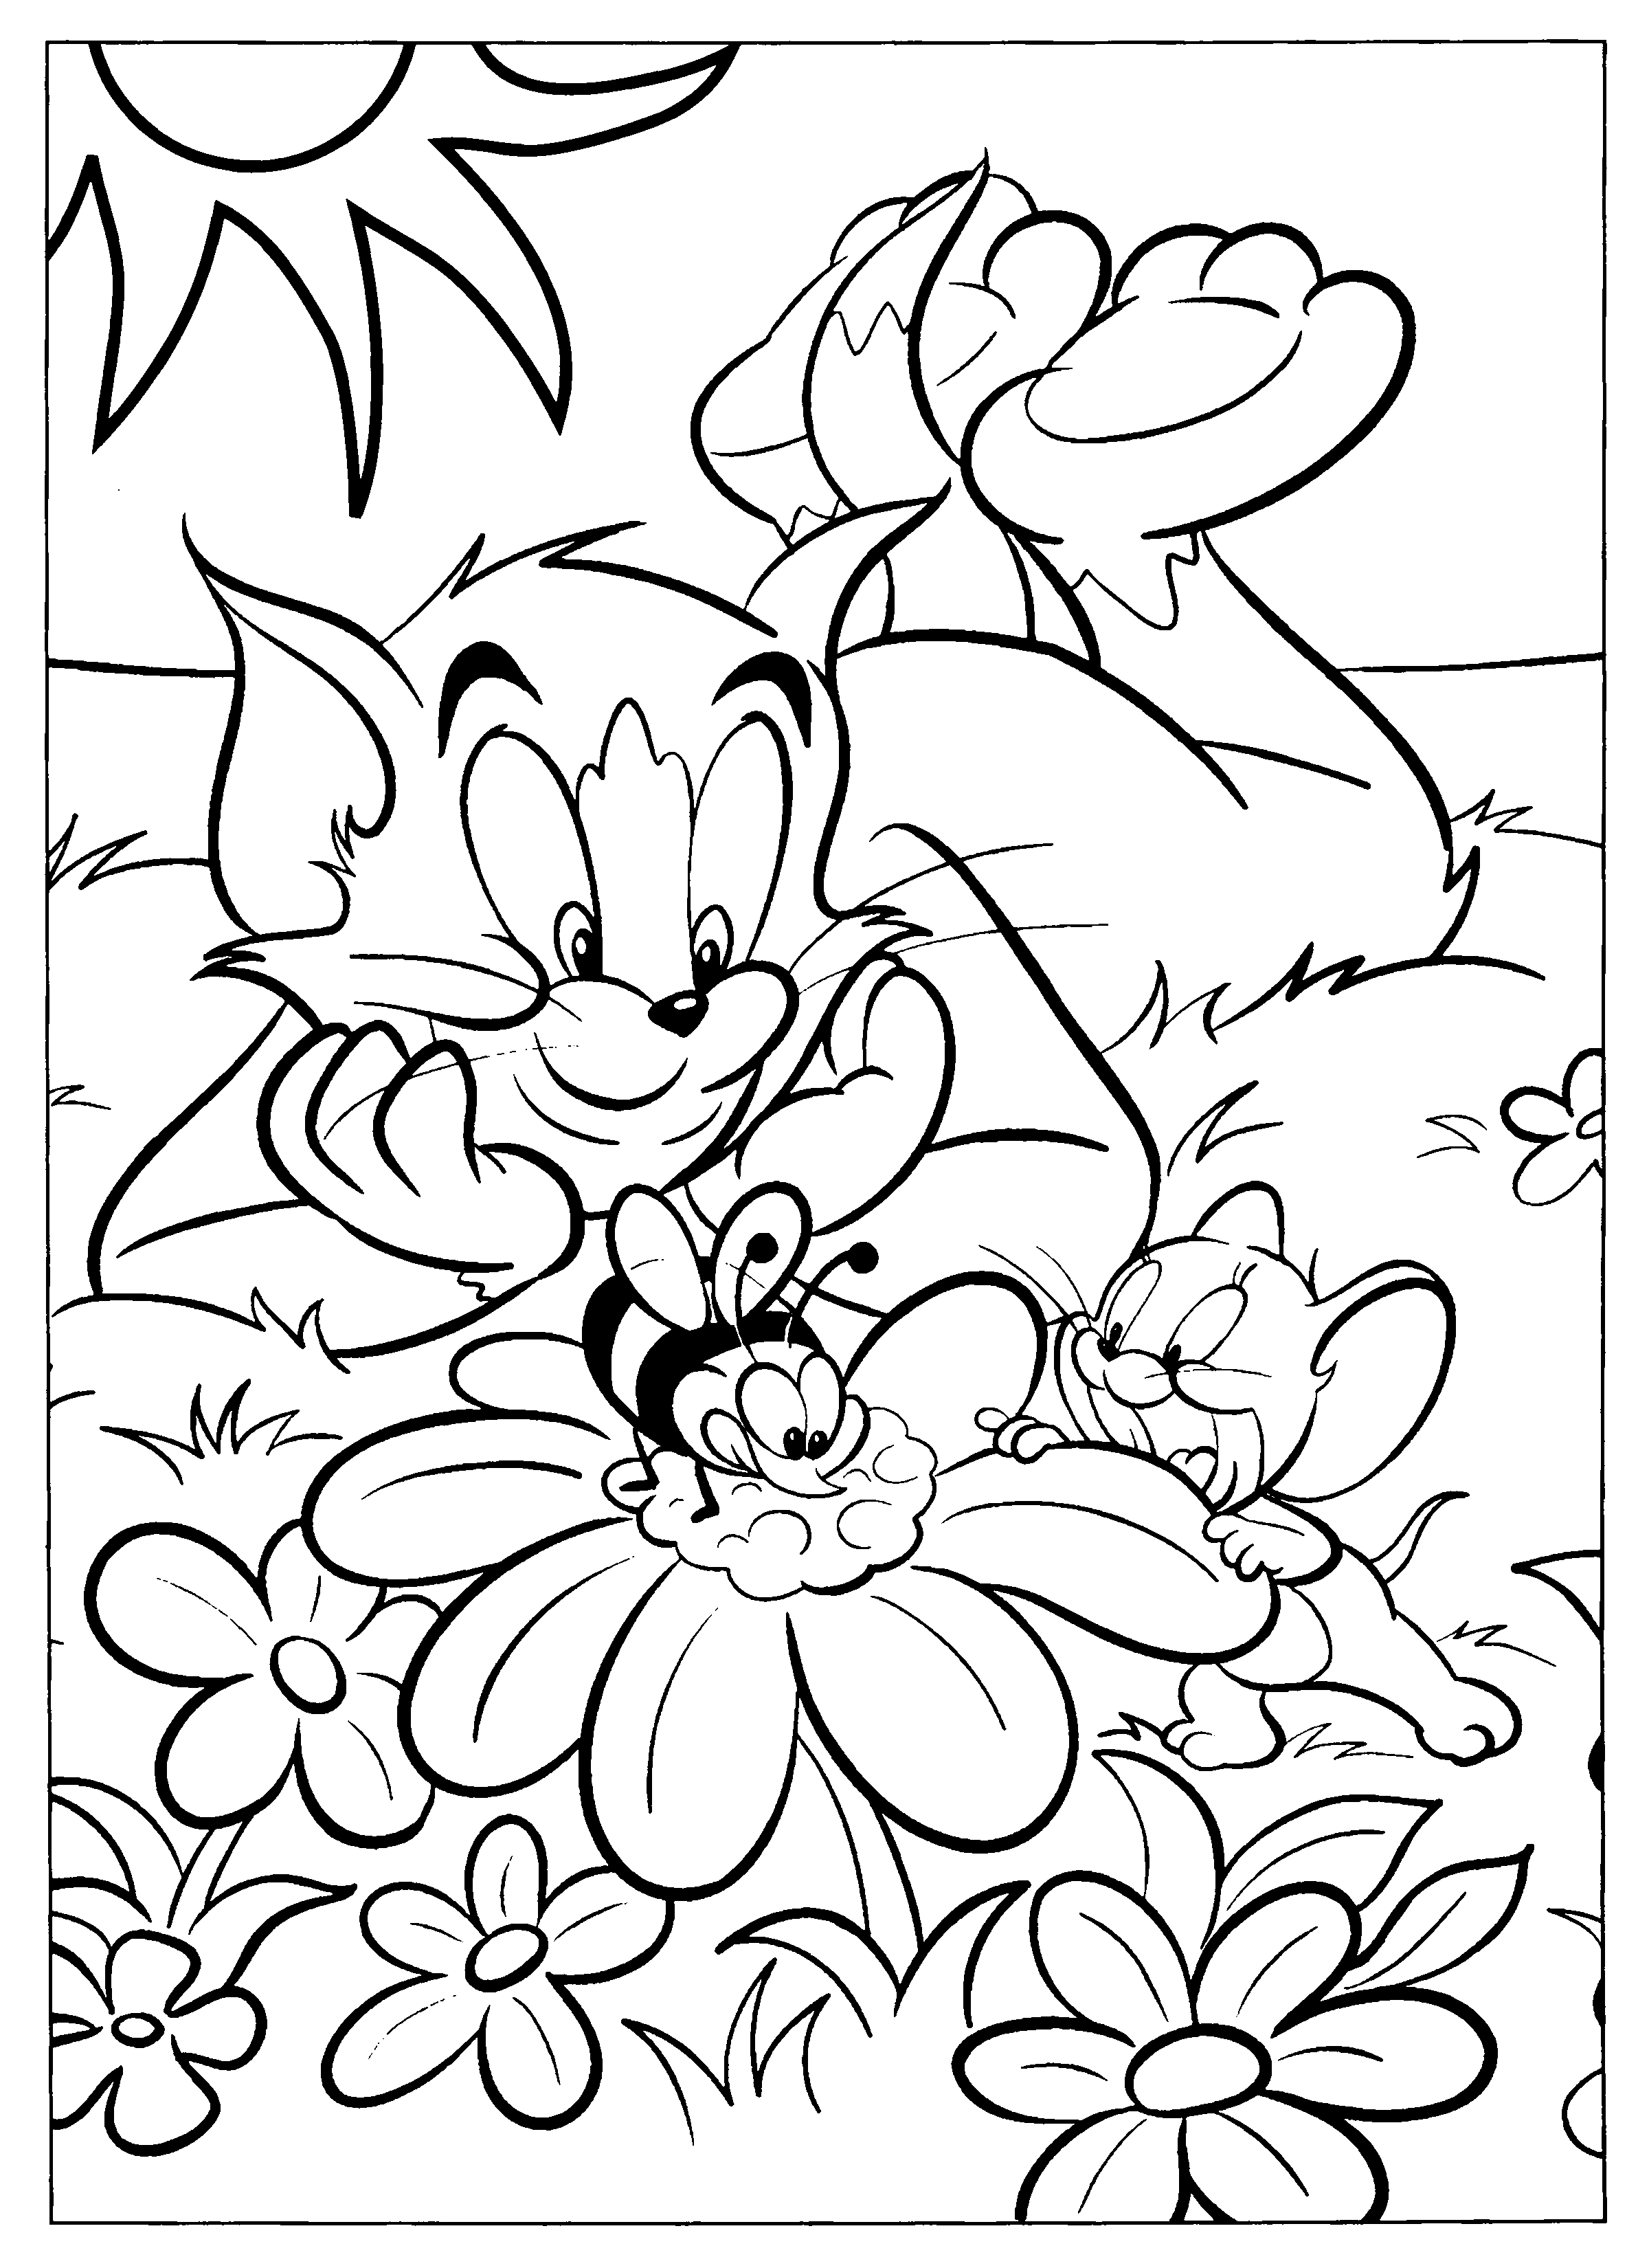  on Resolution 2400 X 3300px Name Tom And Jerry Coloring Pages 0 Gif title=